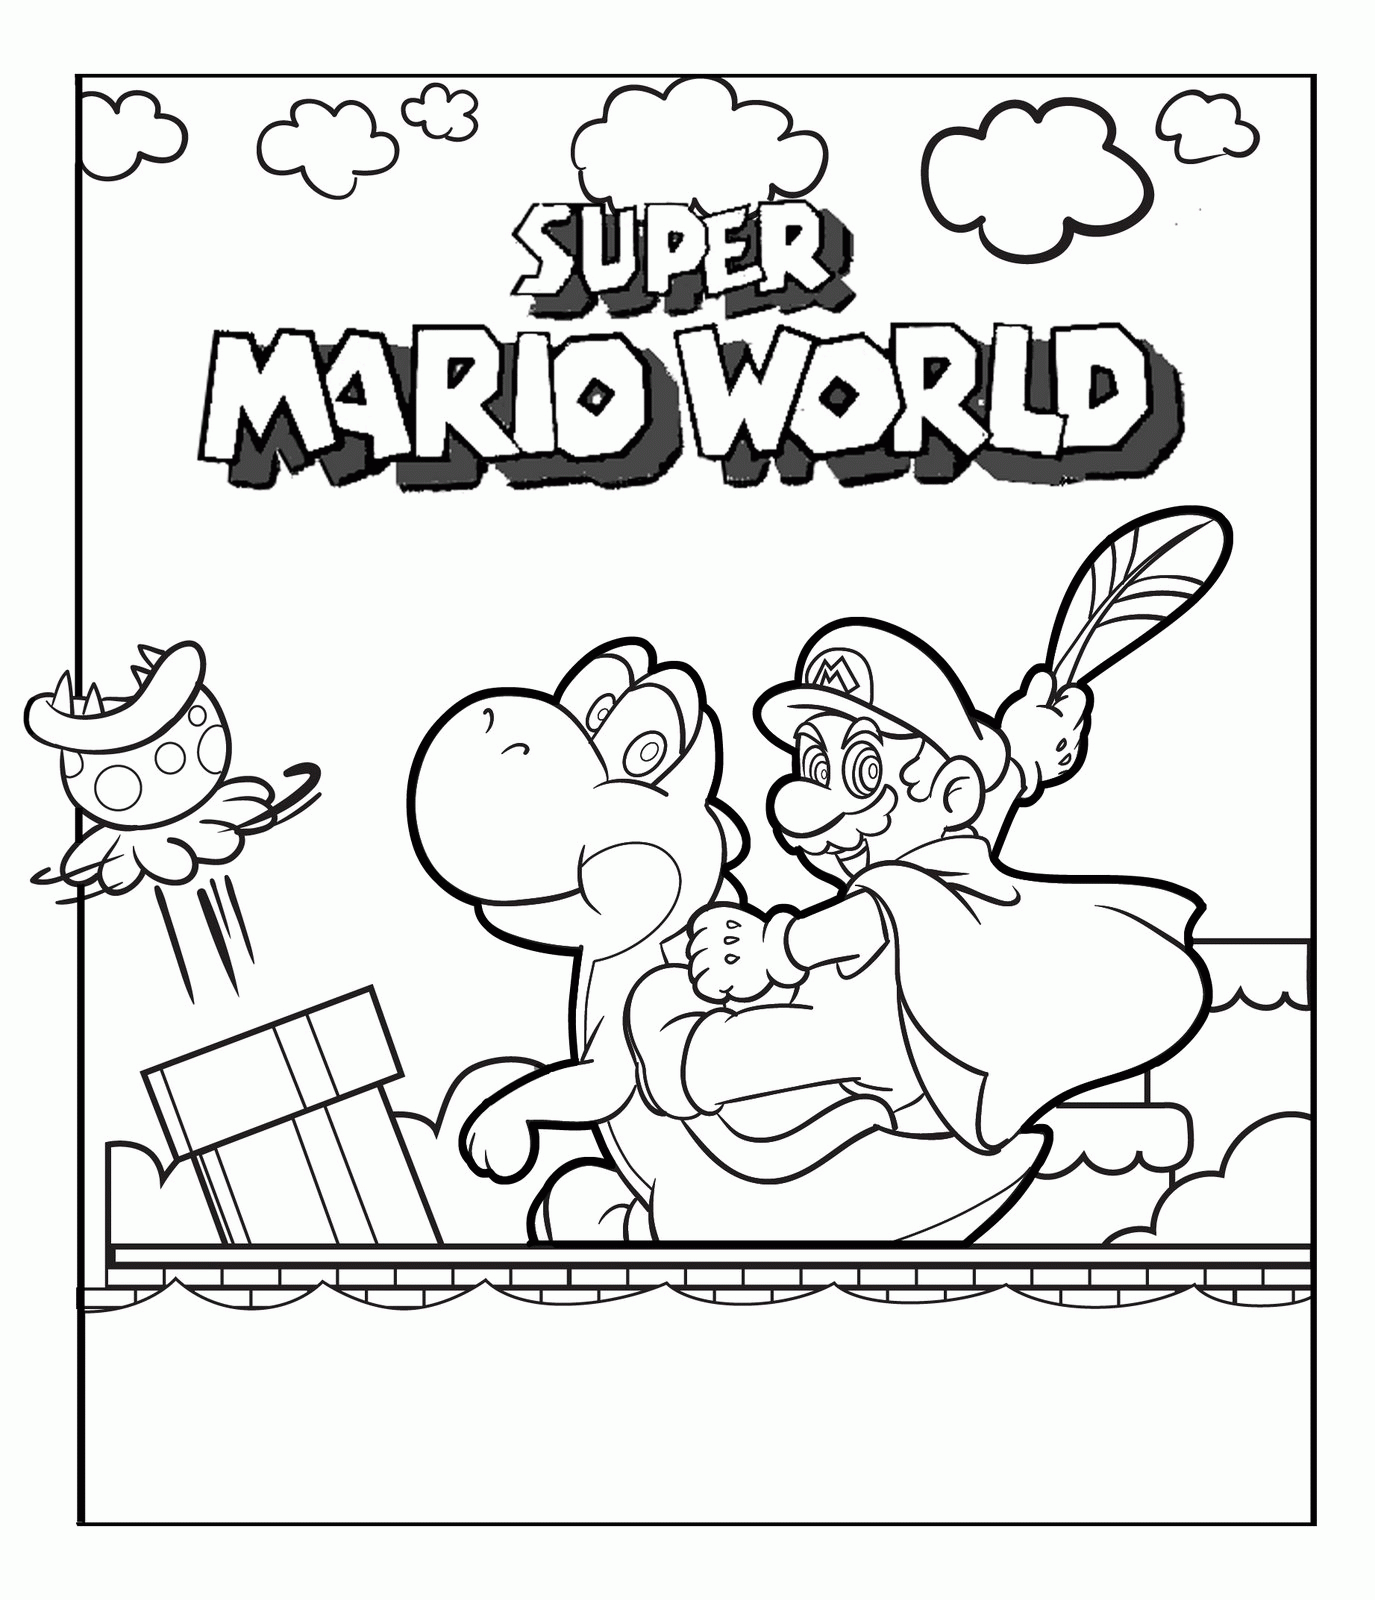 Mario Bros theme for the kids - Page 2